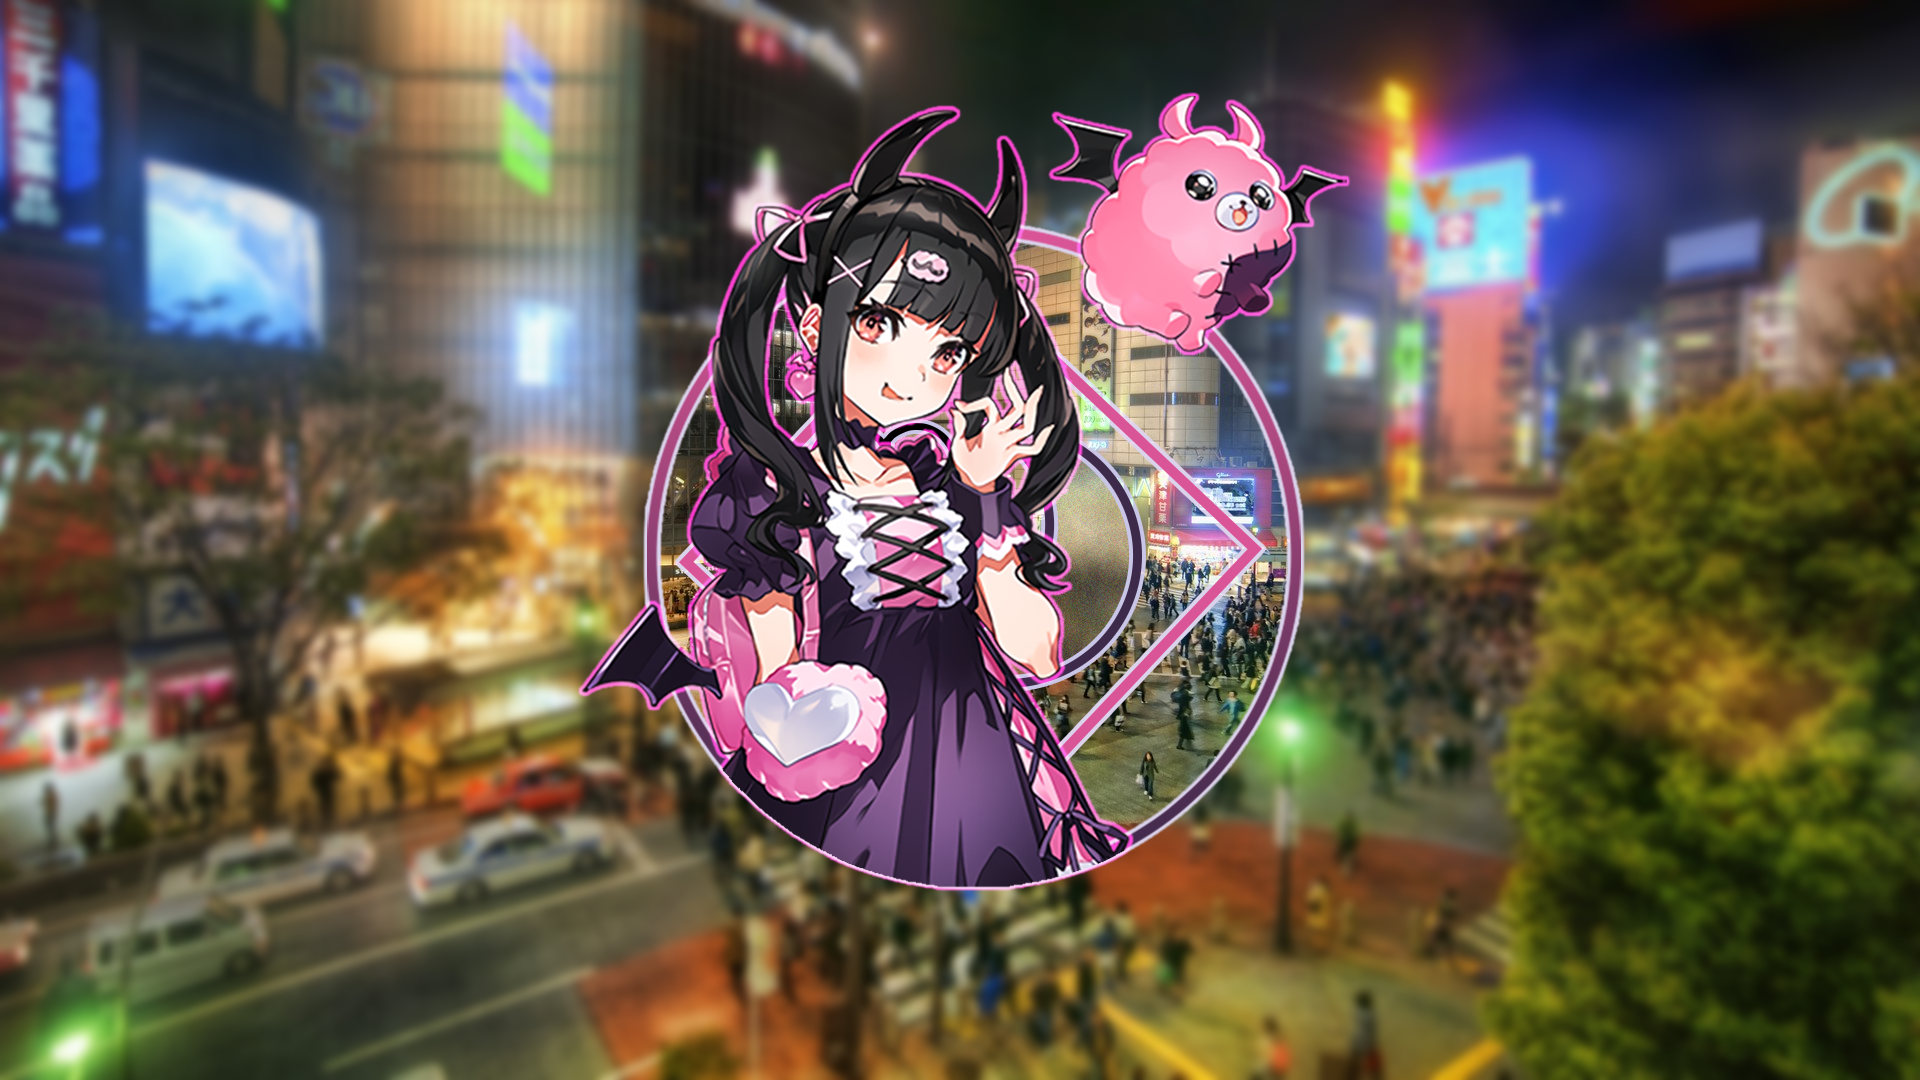 Picture In Picture Anime Girls City Urban Night Denonbu Japan 1920x1080